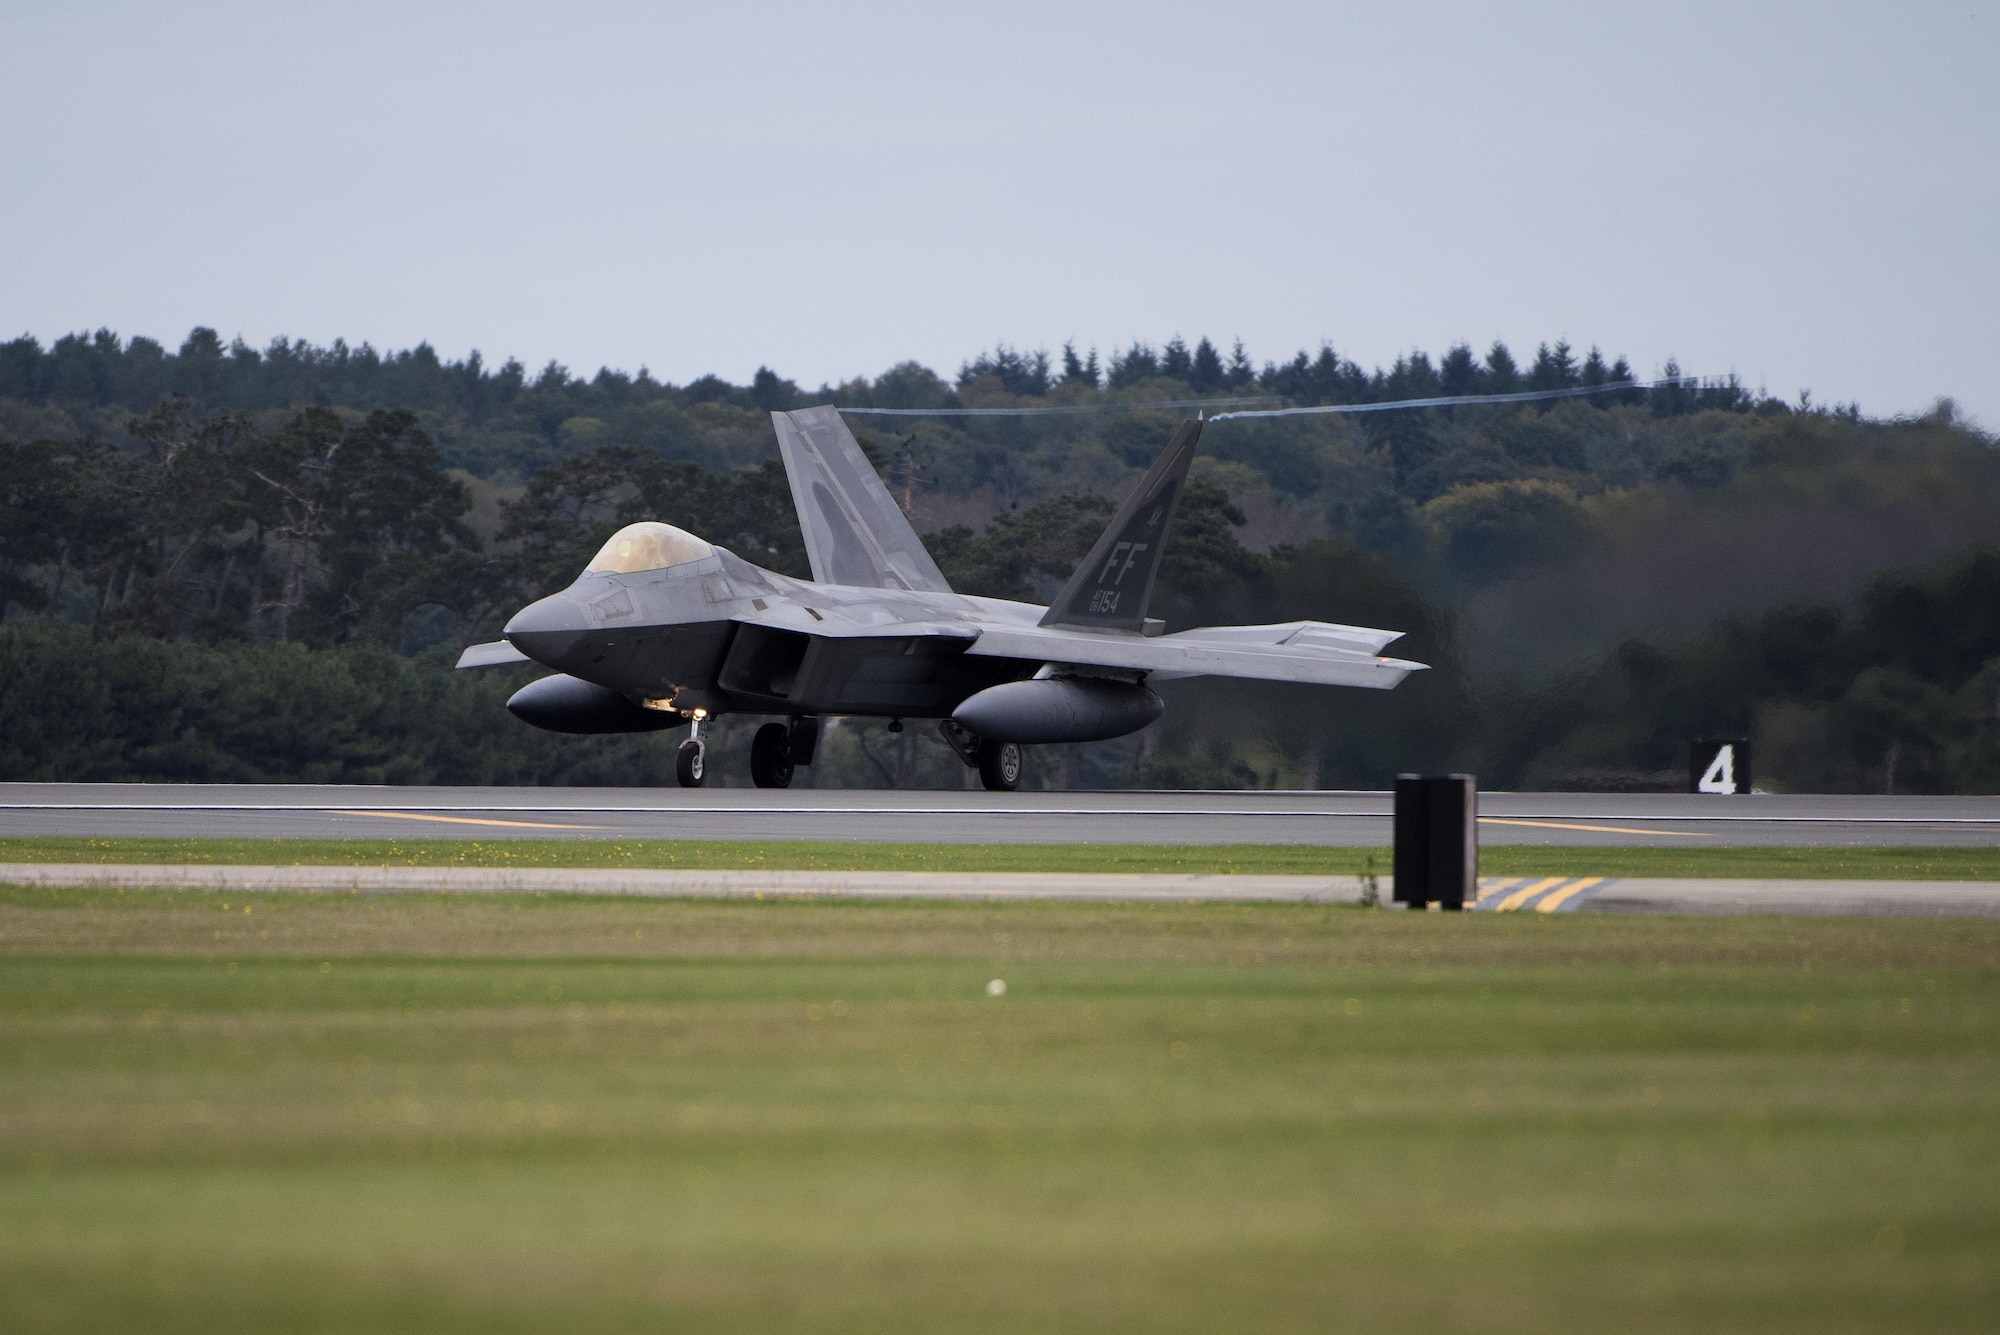 An F-22 Raptor from the 1st Fighter Wing, Joint Base Langley-Eustis,
Virginia lands at Royal Air Force Lakenheath, England Oct. 8, 2017. The U.S.
Air Force has deployed F-22 Raptors, Airmen and associated equipment to RAF
Lakenheath, for a flying training deployment to conduct air training with
other Europe-based U.S. aircraft and NATO allies. (U.S. Air Force photo/Senior Airman Malcolm Mayfield)